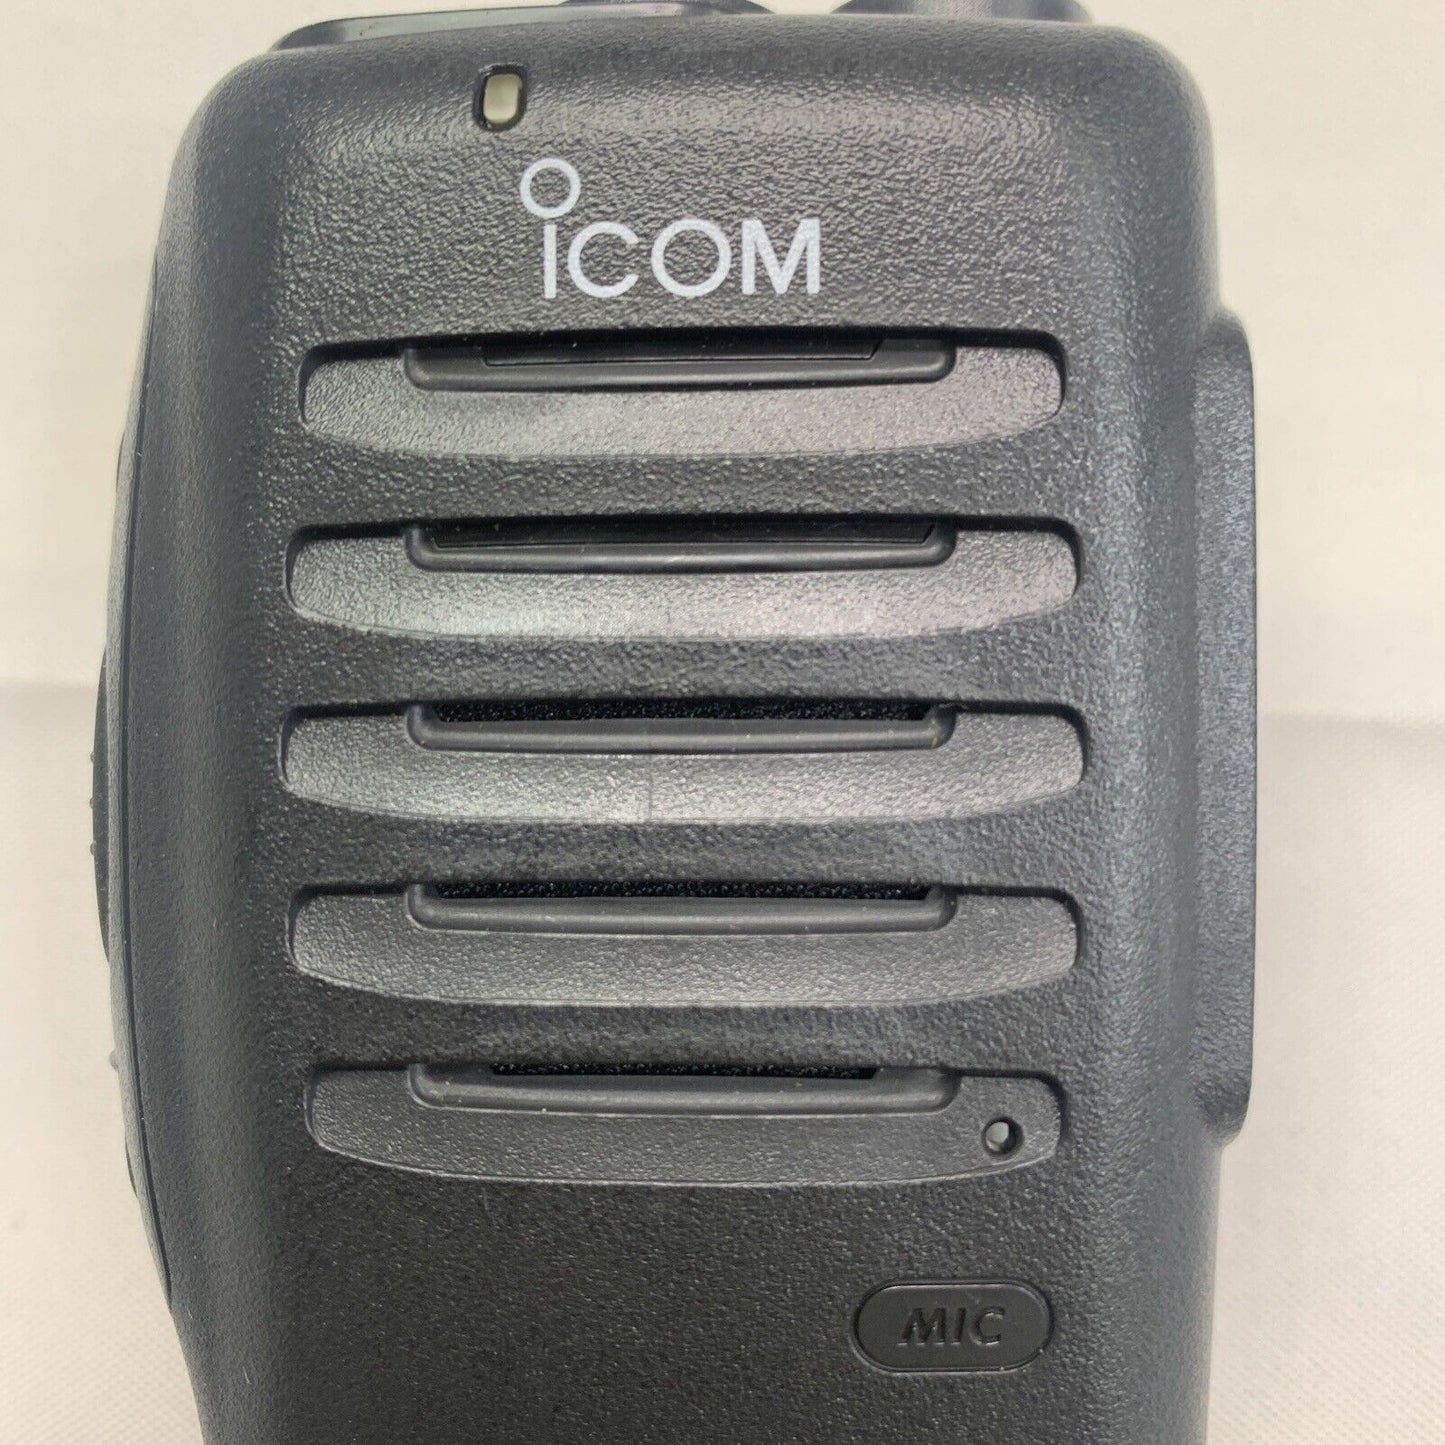 Genuine OEM Icom Front Case Housing for IC-F11 and IC-F21